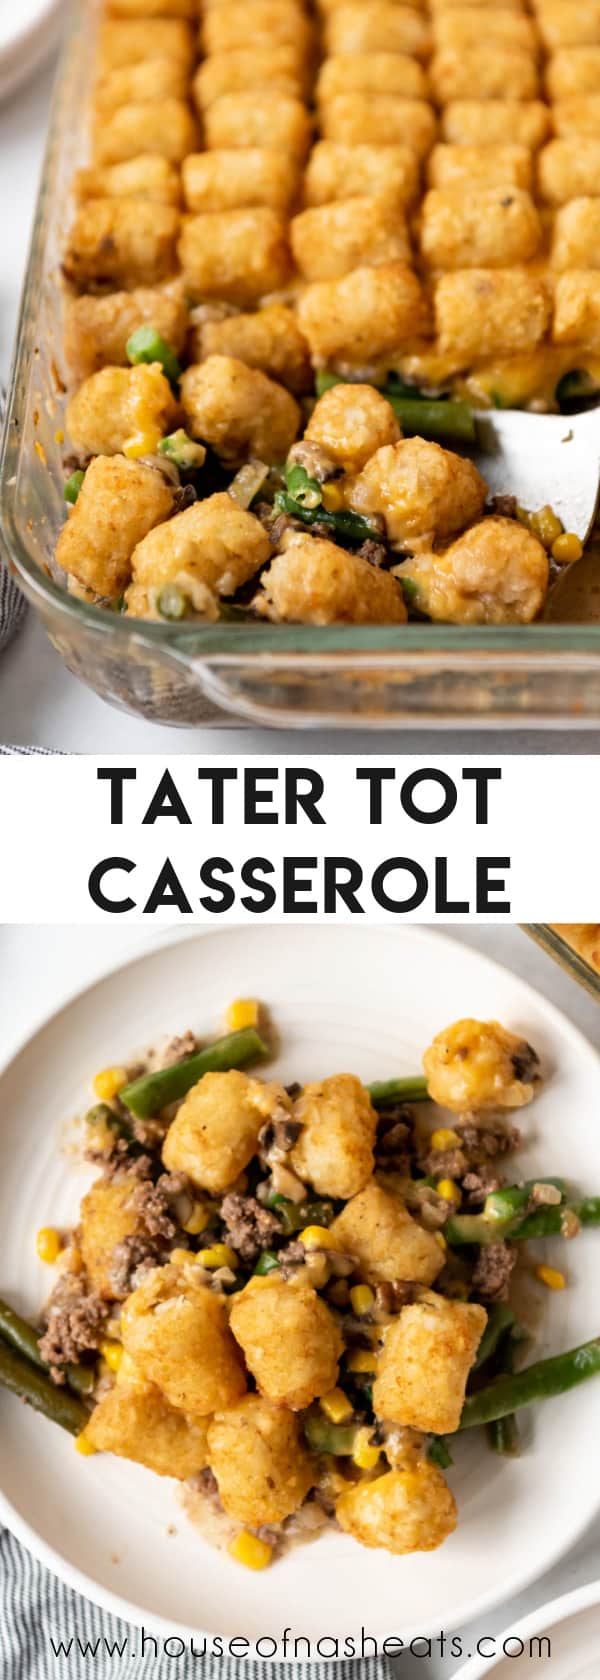 A collage of images of tater tot casserole with text o verlay.